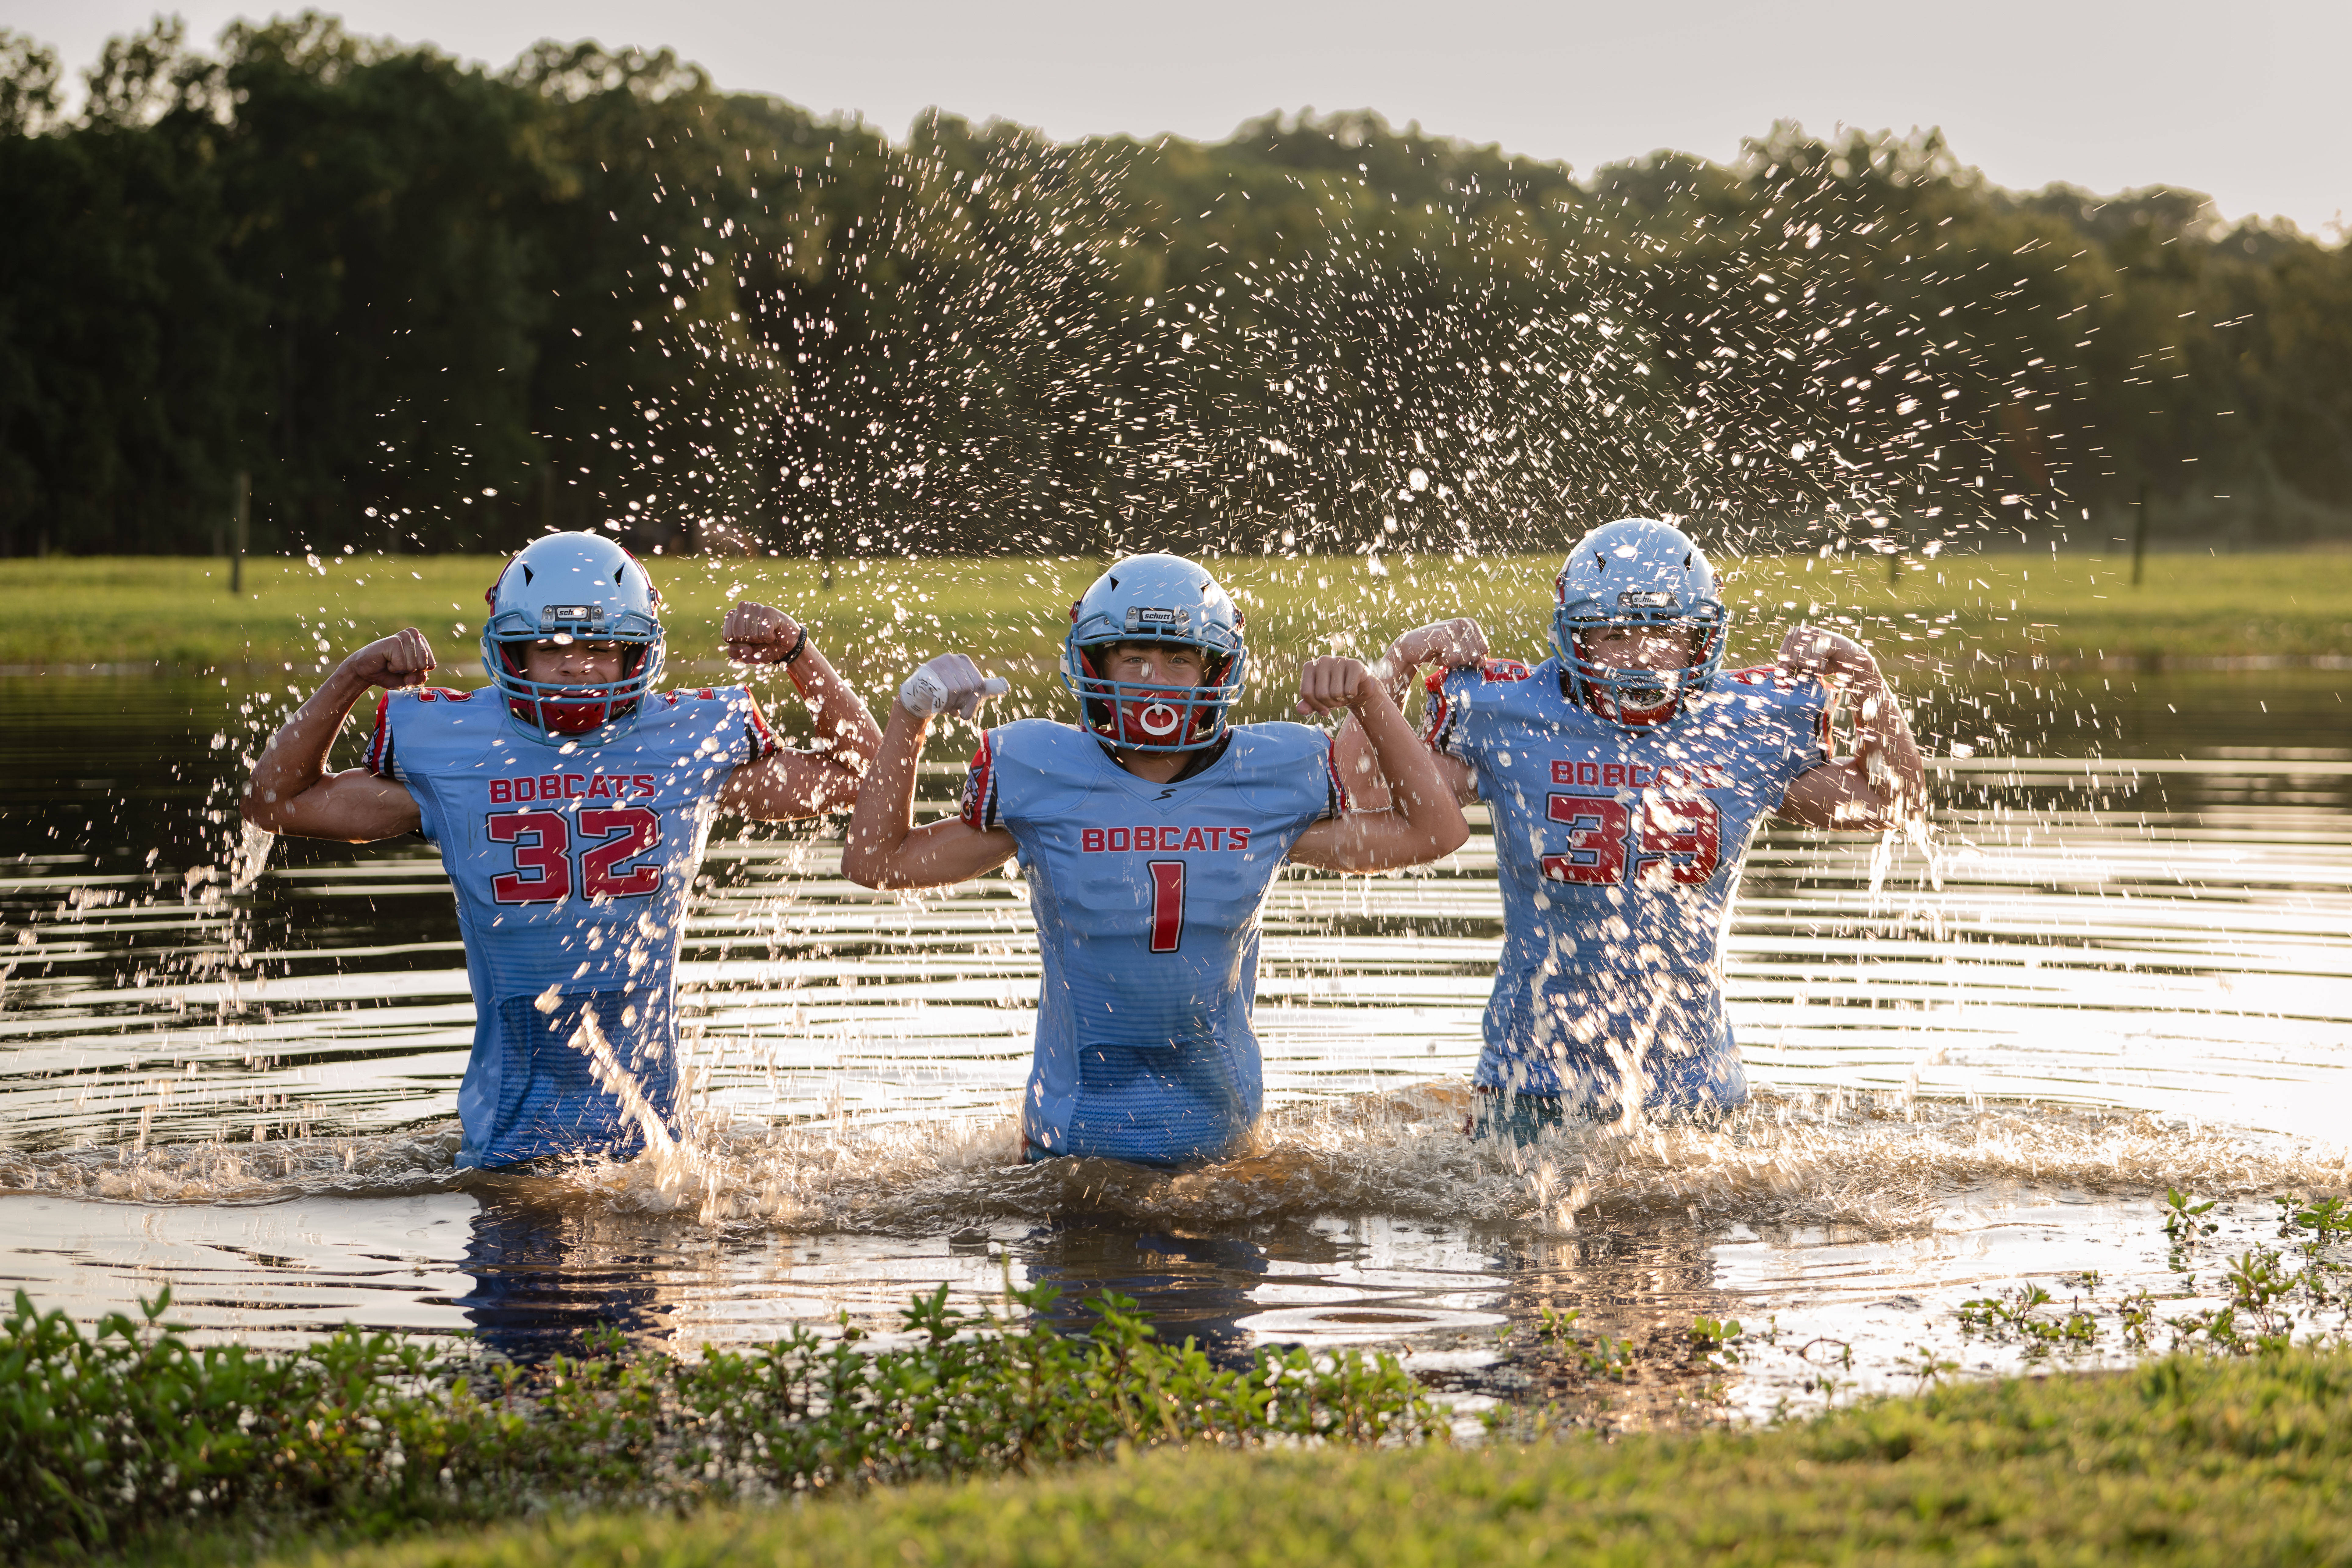 Football and Water Teen Senior Session in Parkersburg, WV